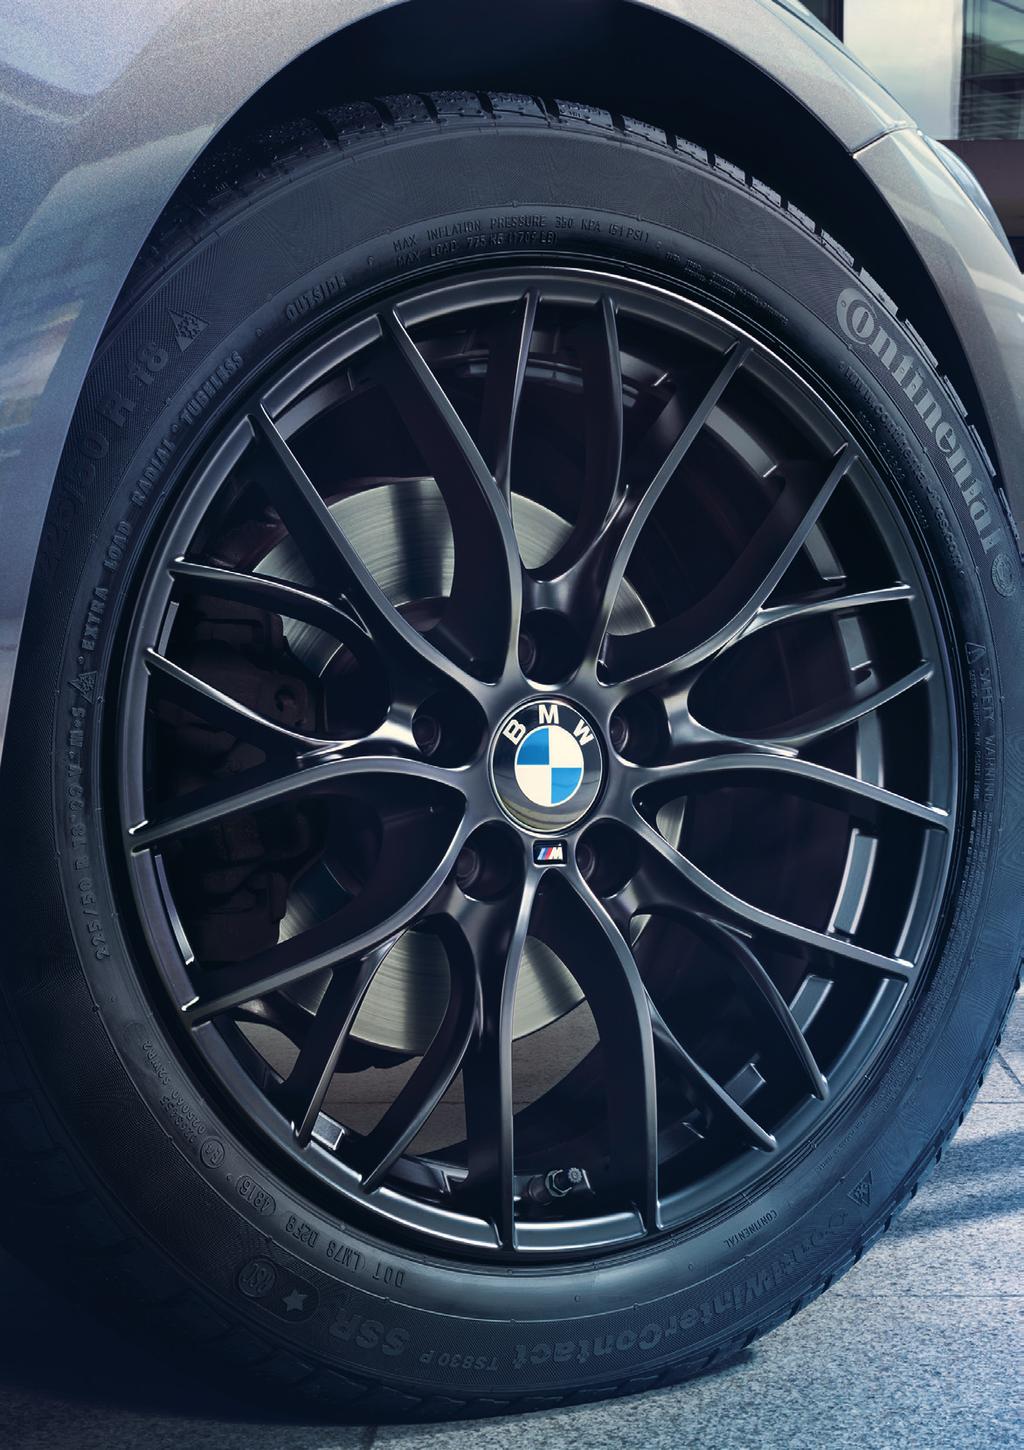 MUST-HAVE OF THE SEASON. WINTER WHEELS BY BMW.